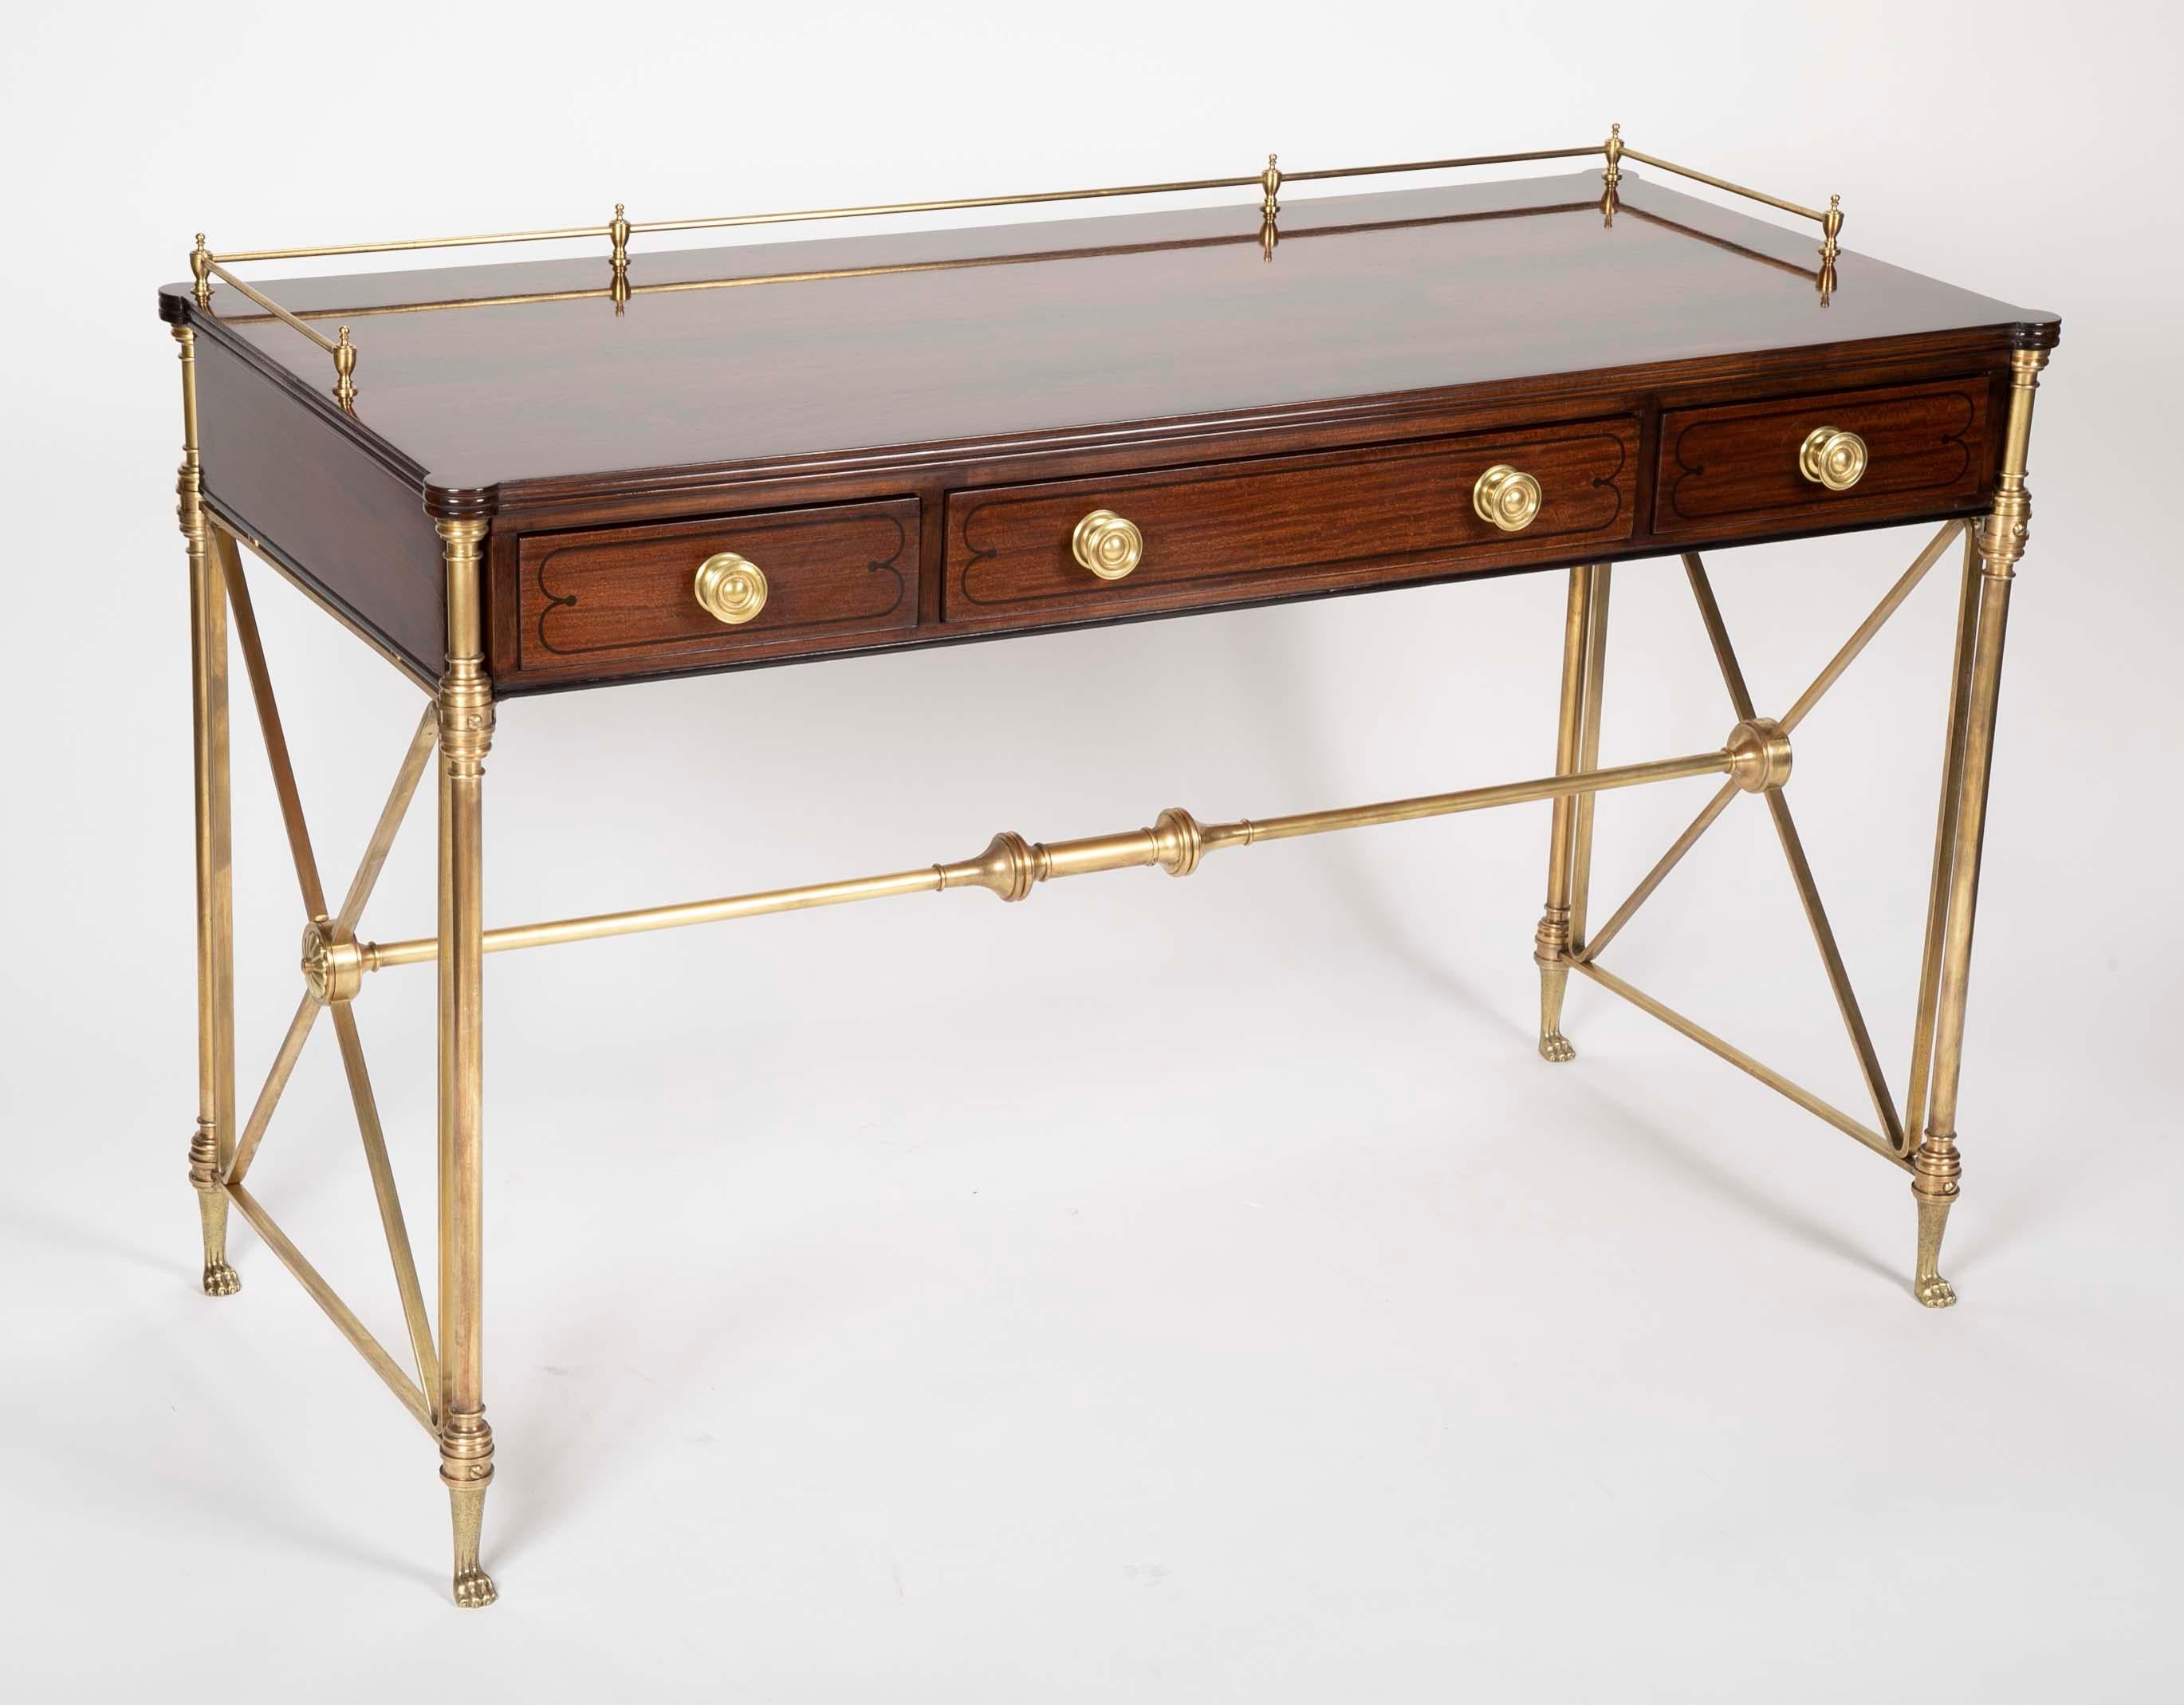 Classic rosewood Campaign desk in the English Regency style. With bronze legs and stretcher and paw feet. This handsome, beautifully designed desk is the height of elegance. Perfect as a writing table, desk or console table. Midcentury, made by